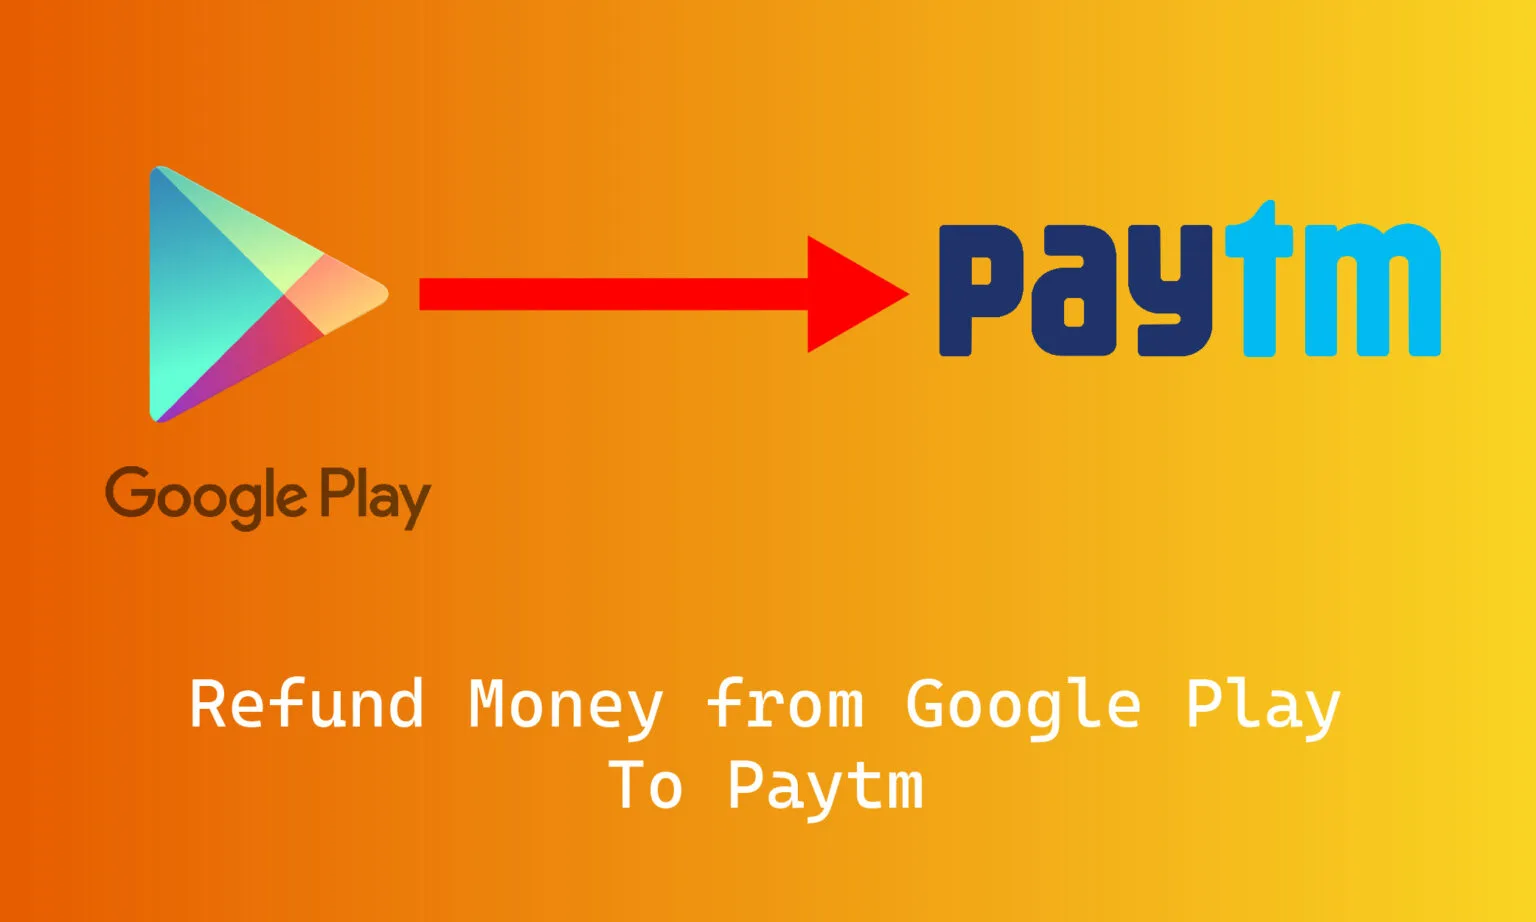 How to Refund Money from Google Play to Paytm